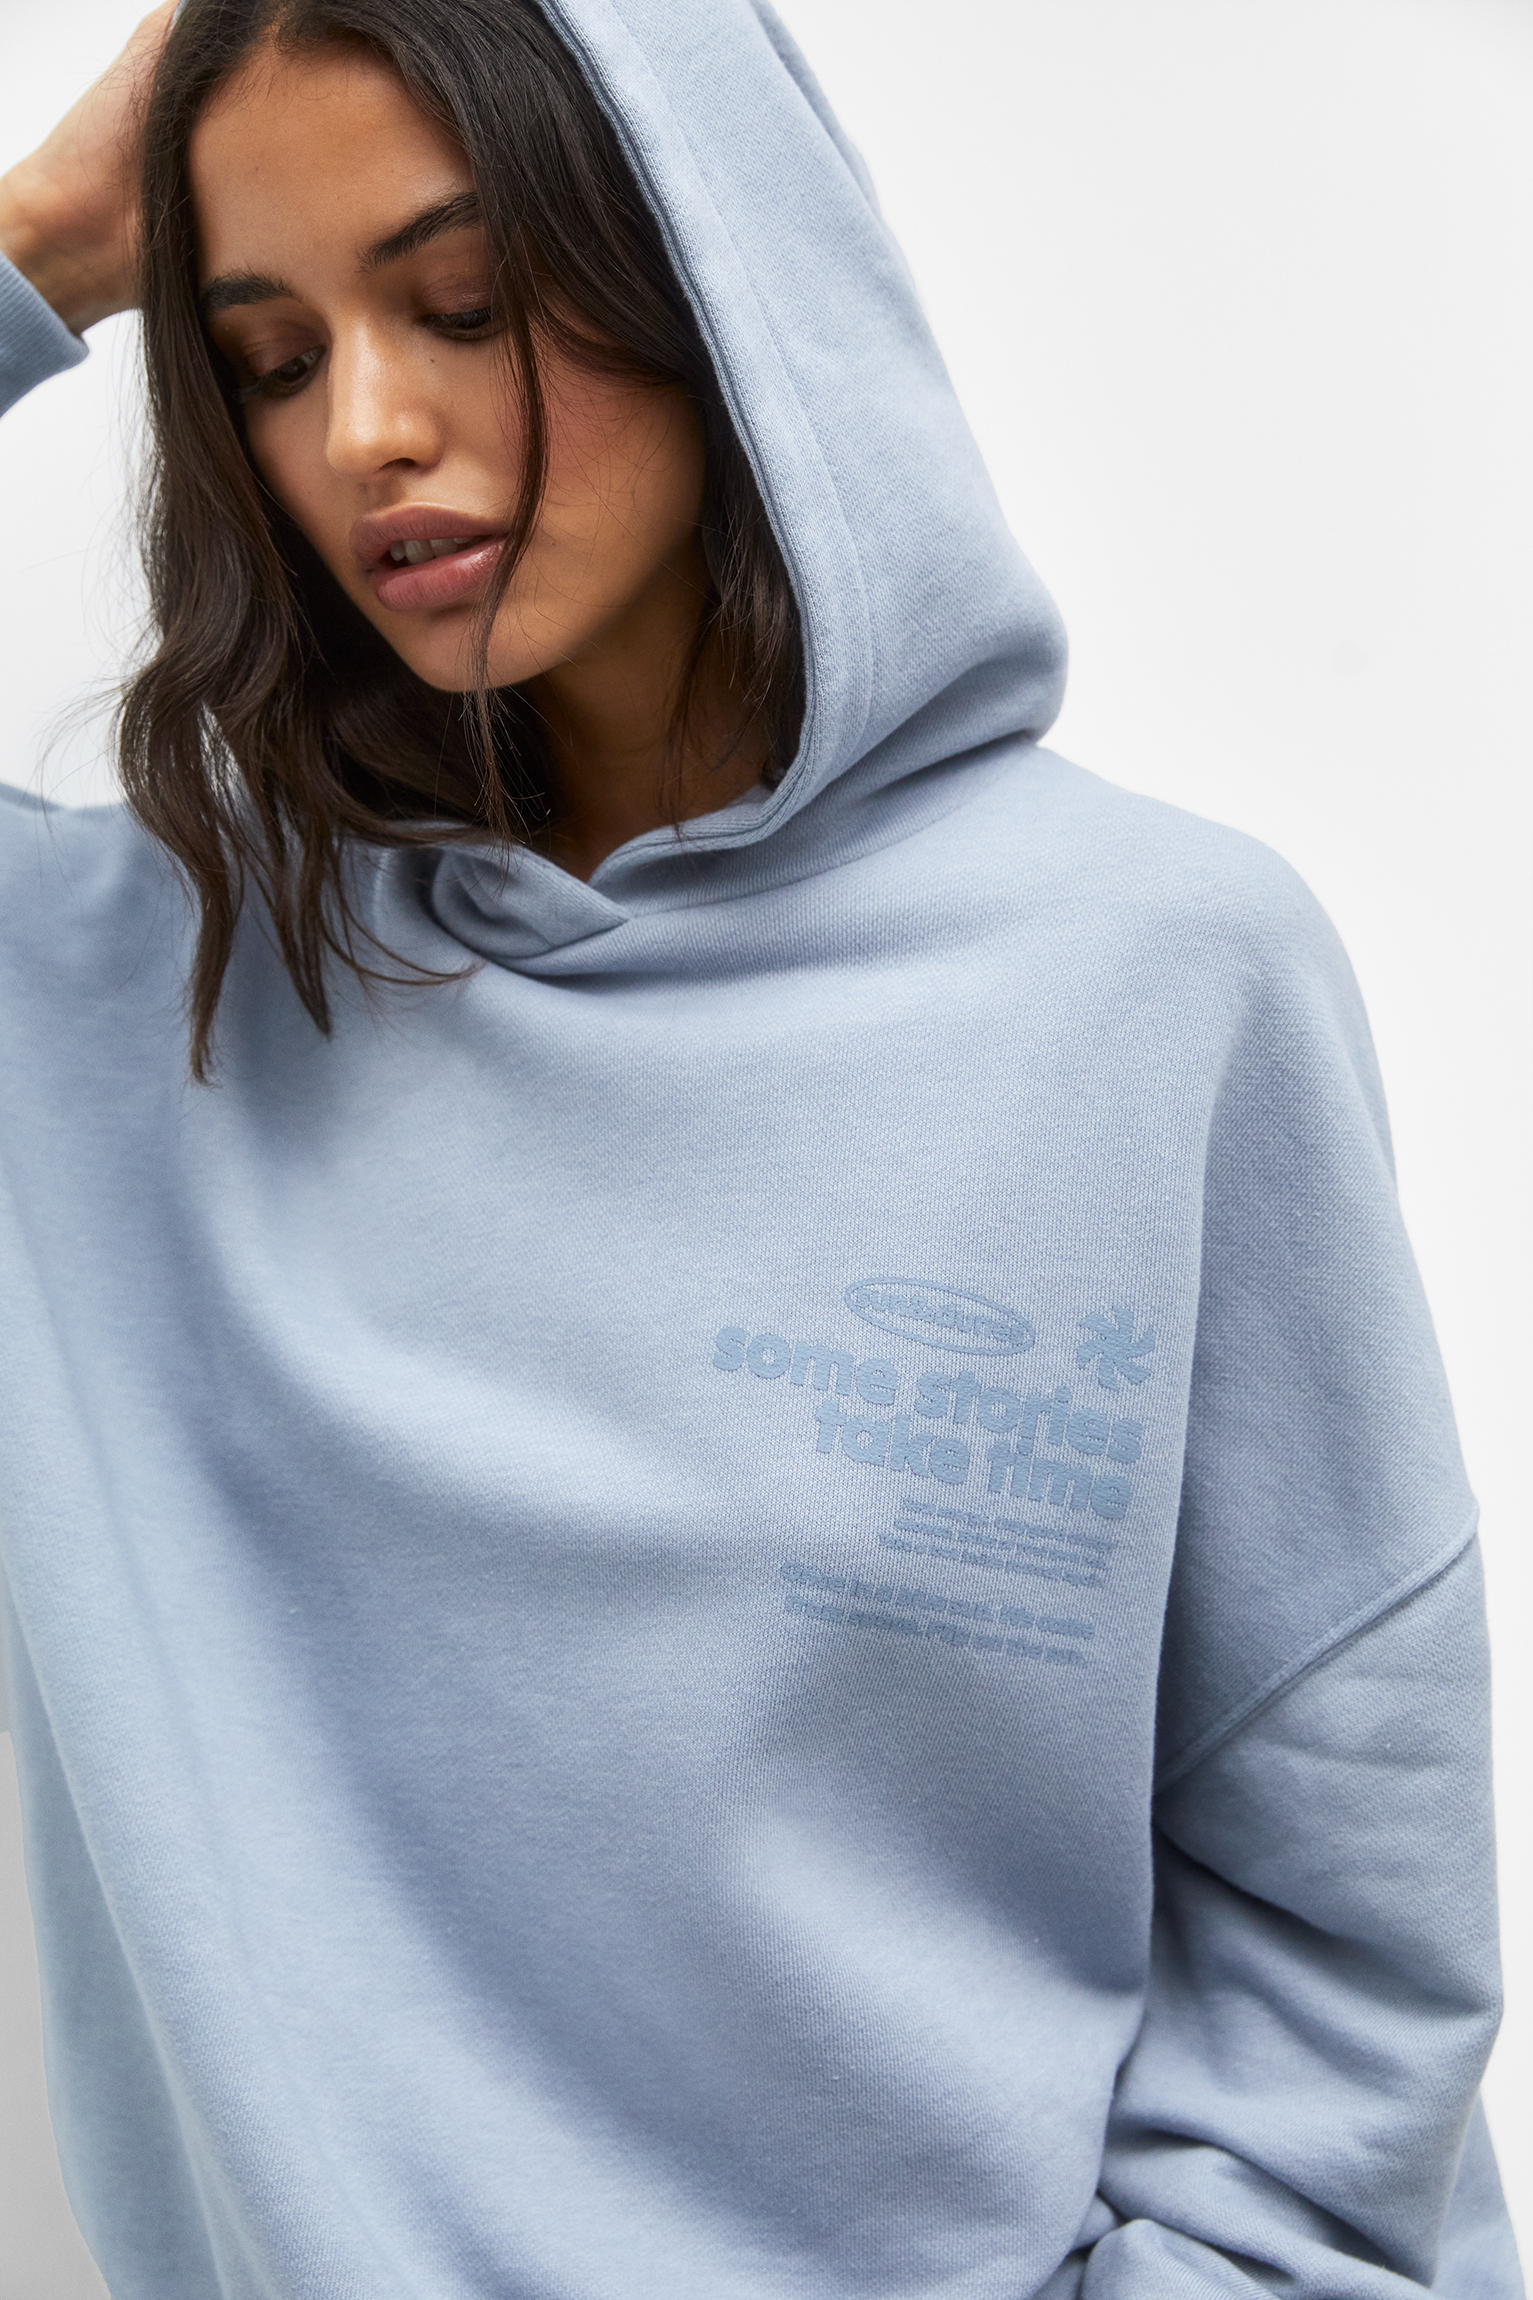 Oversized hoodie with a slogan - pull&bear